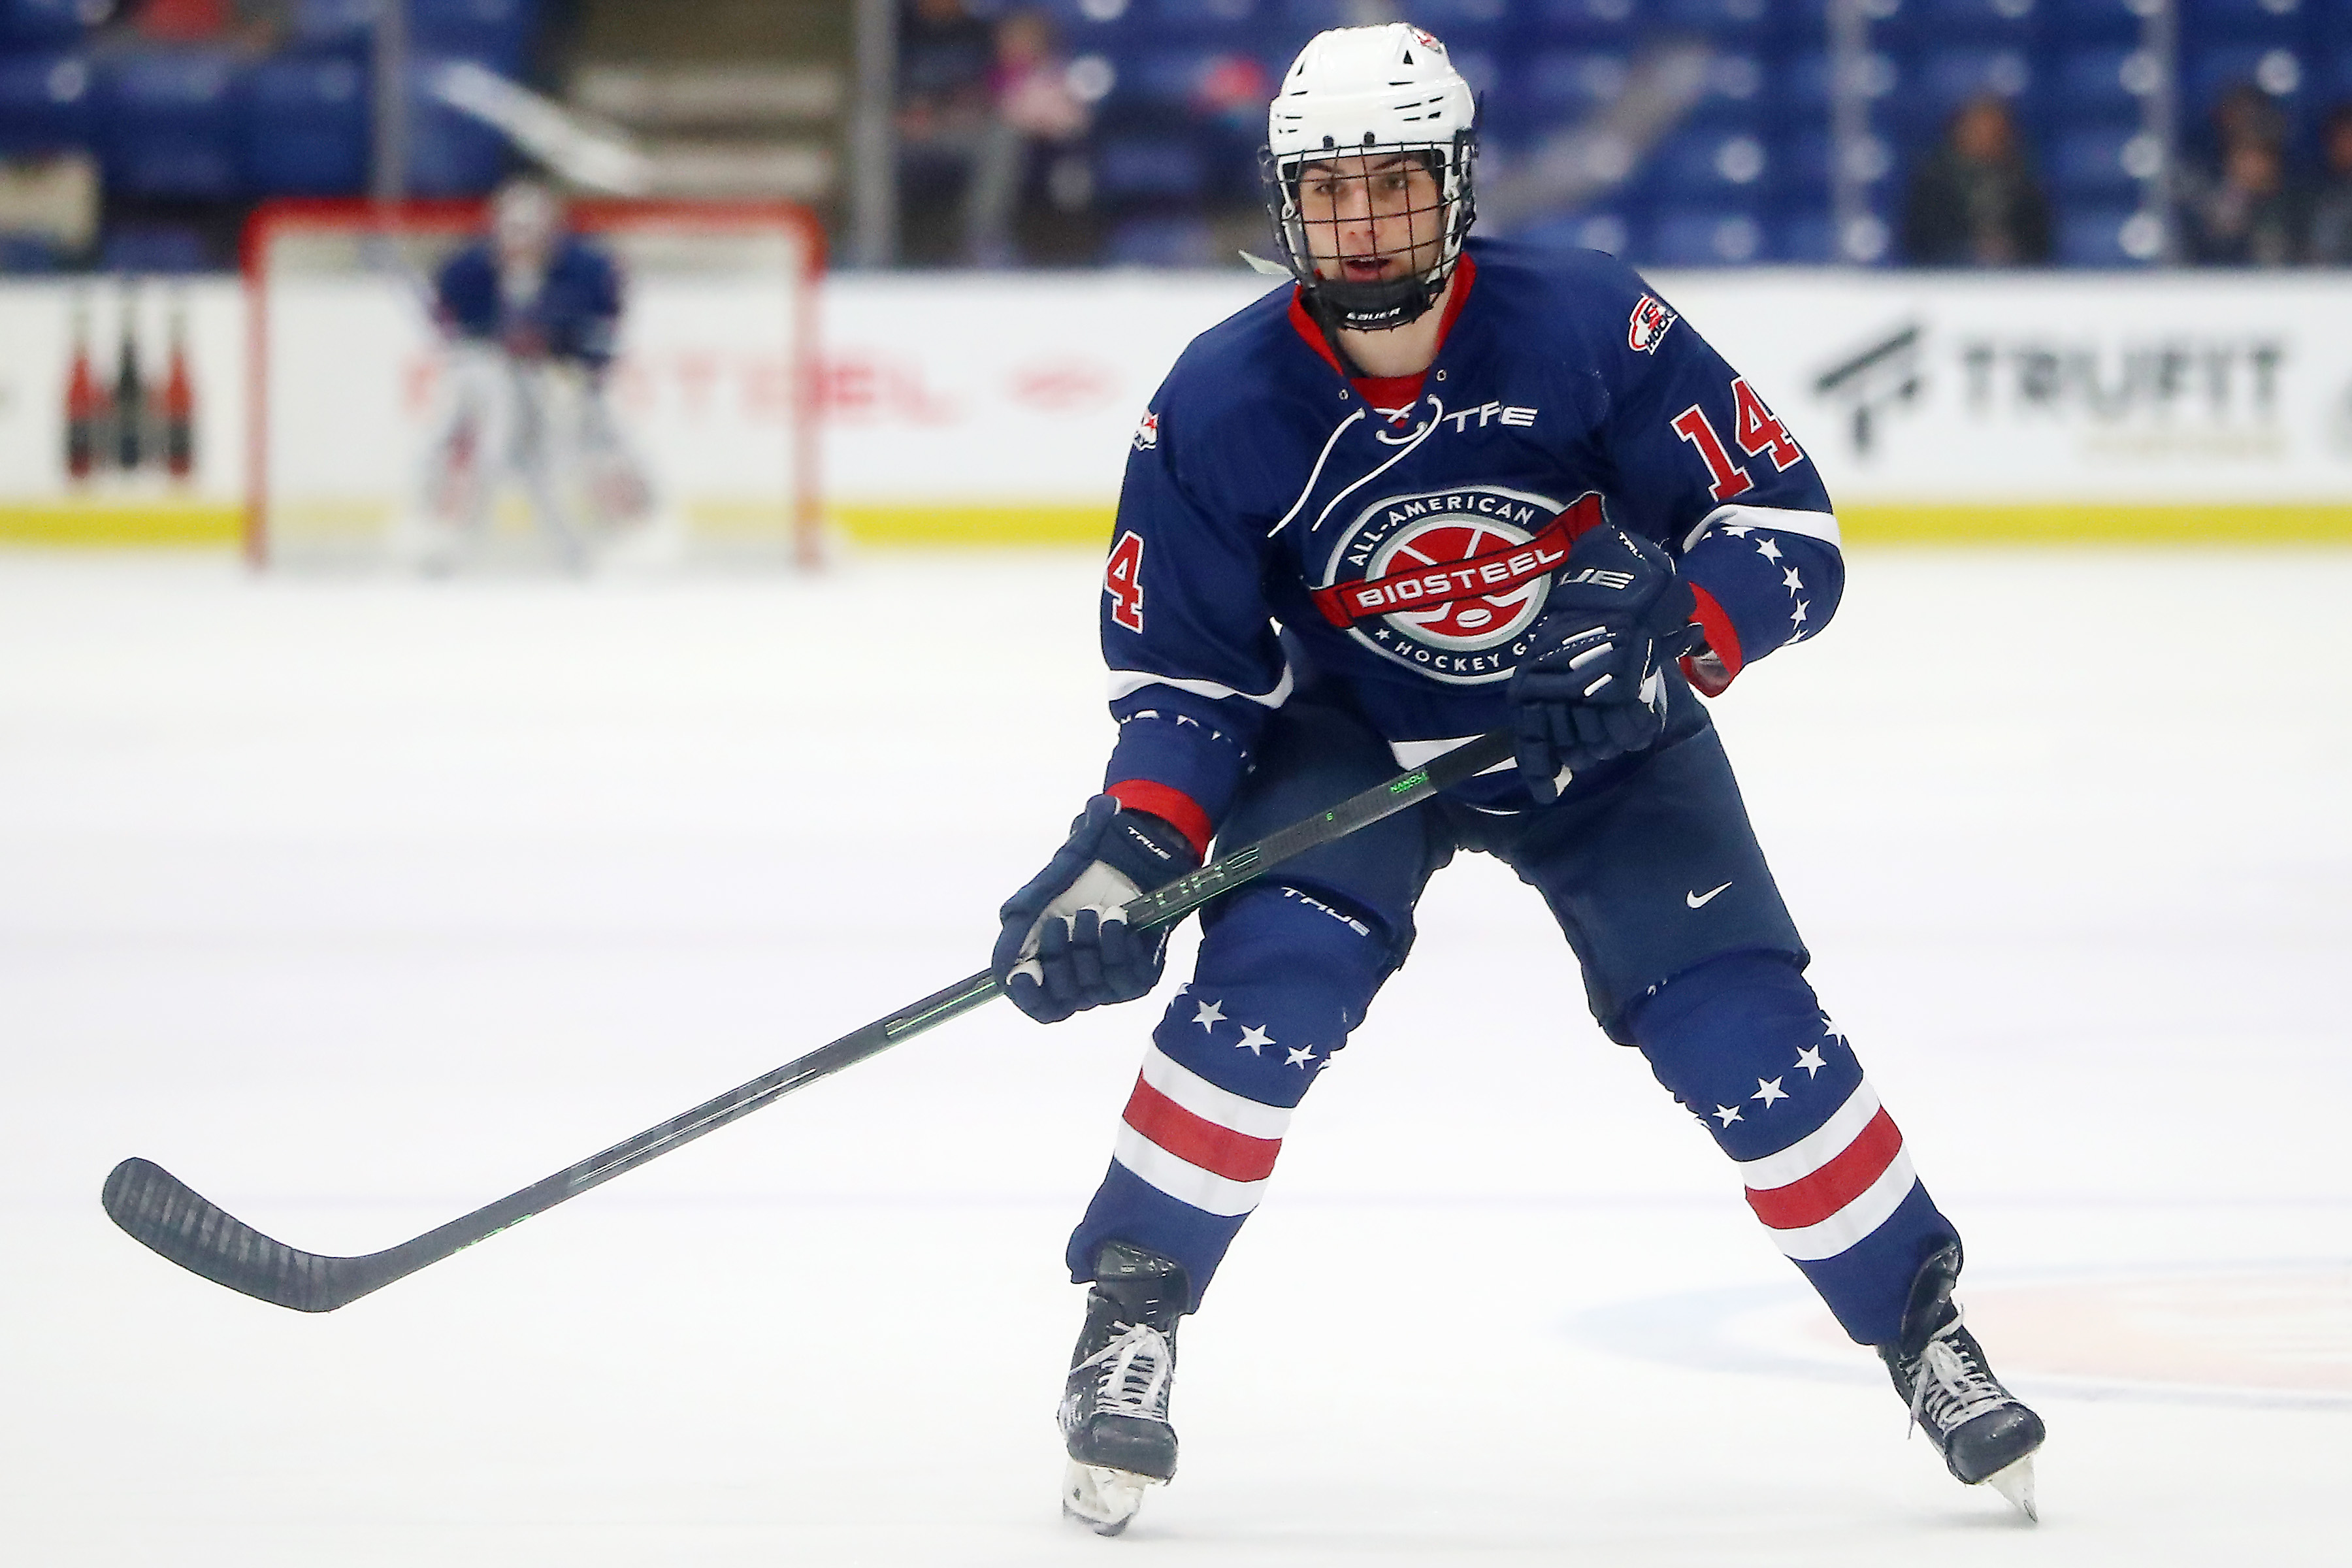 Frank Nazar III #14 of Team Blue skates up the ice in the first period at USA Hockey Arena on January 17, 2022 in Plymouth, Michigan.